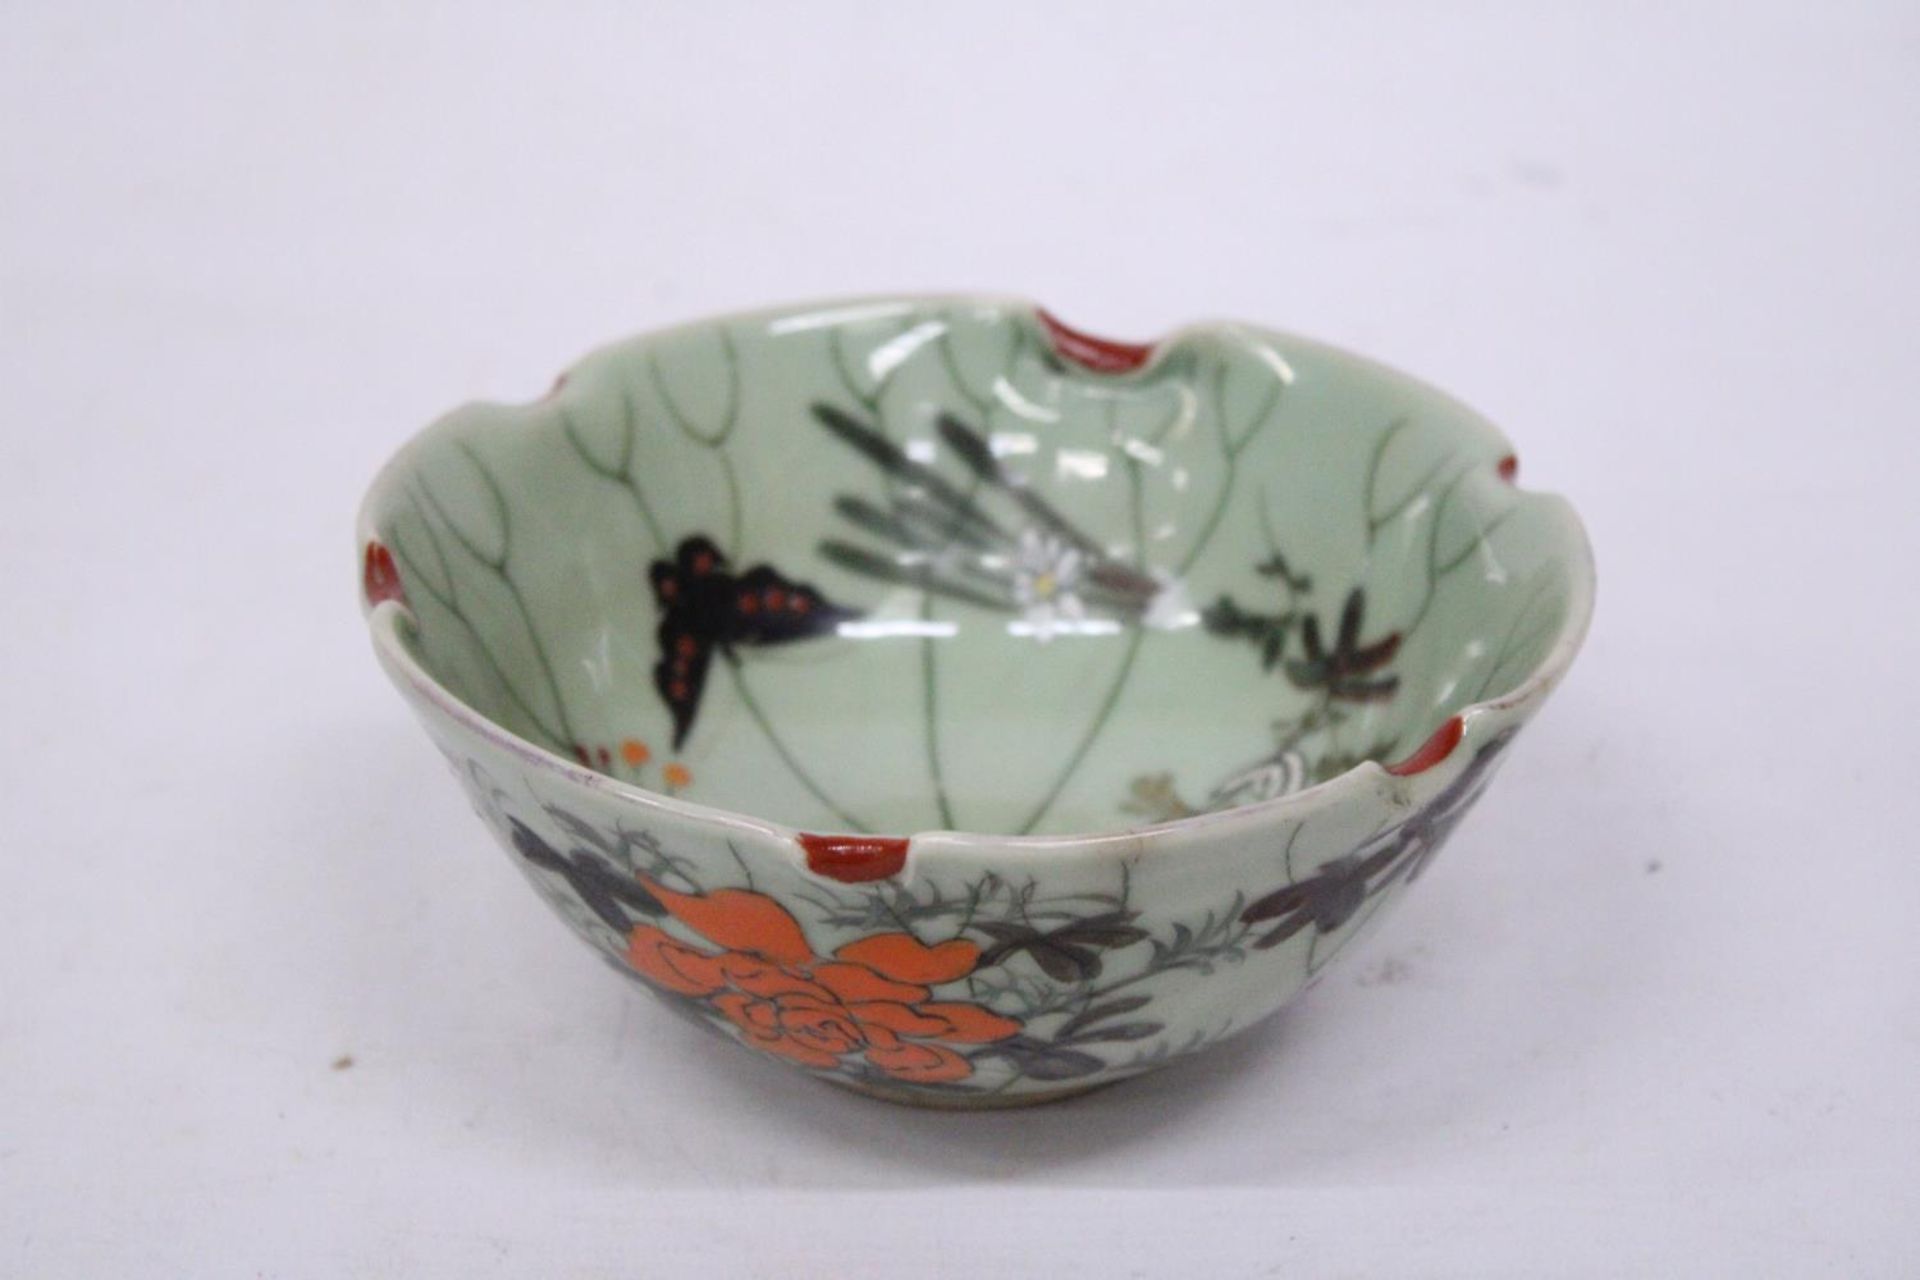 A CHINESE PORCELAIN GLAZED FOOTED BOWL WITH FLORAL DECORATION